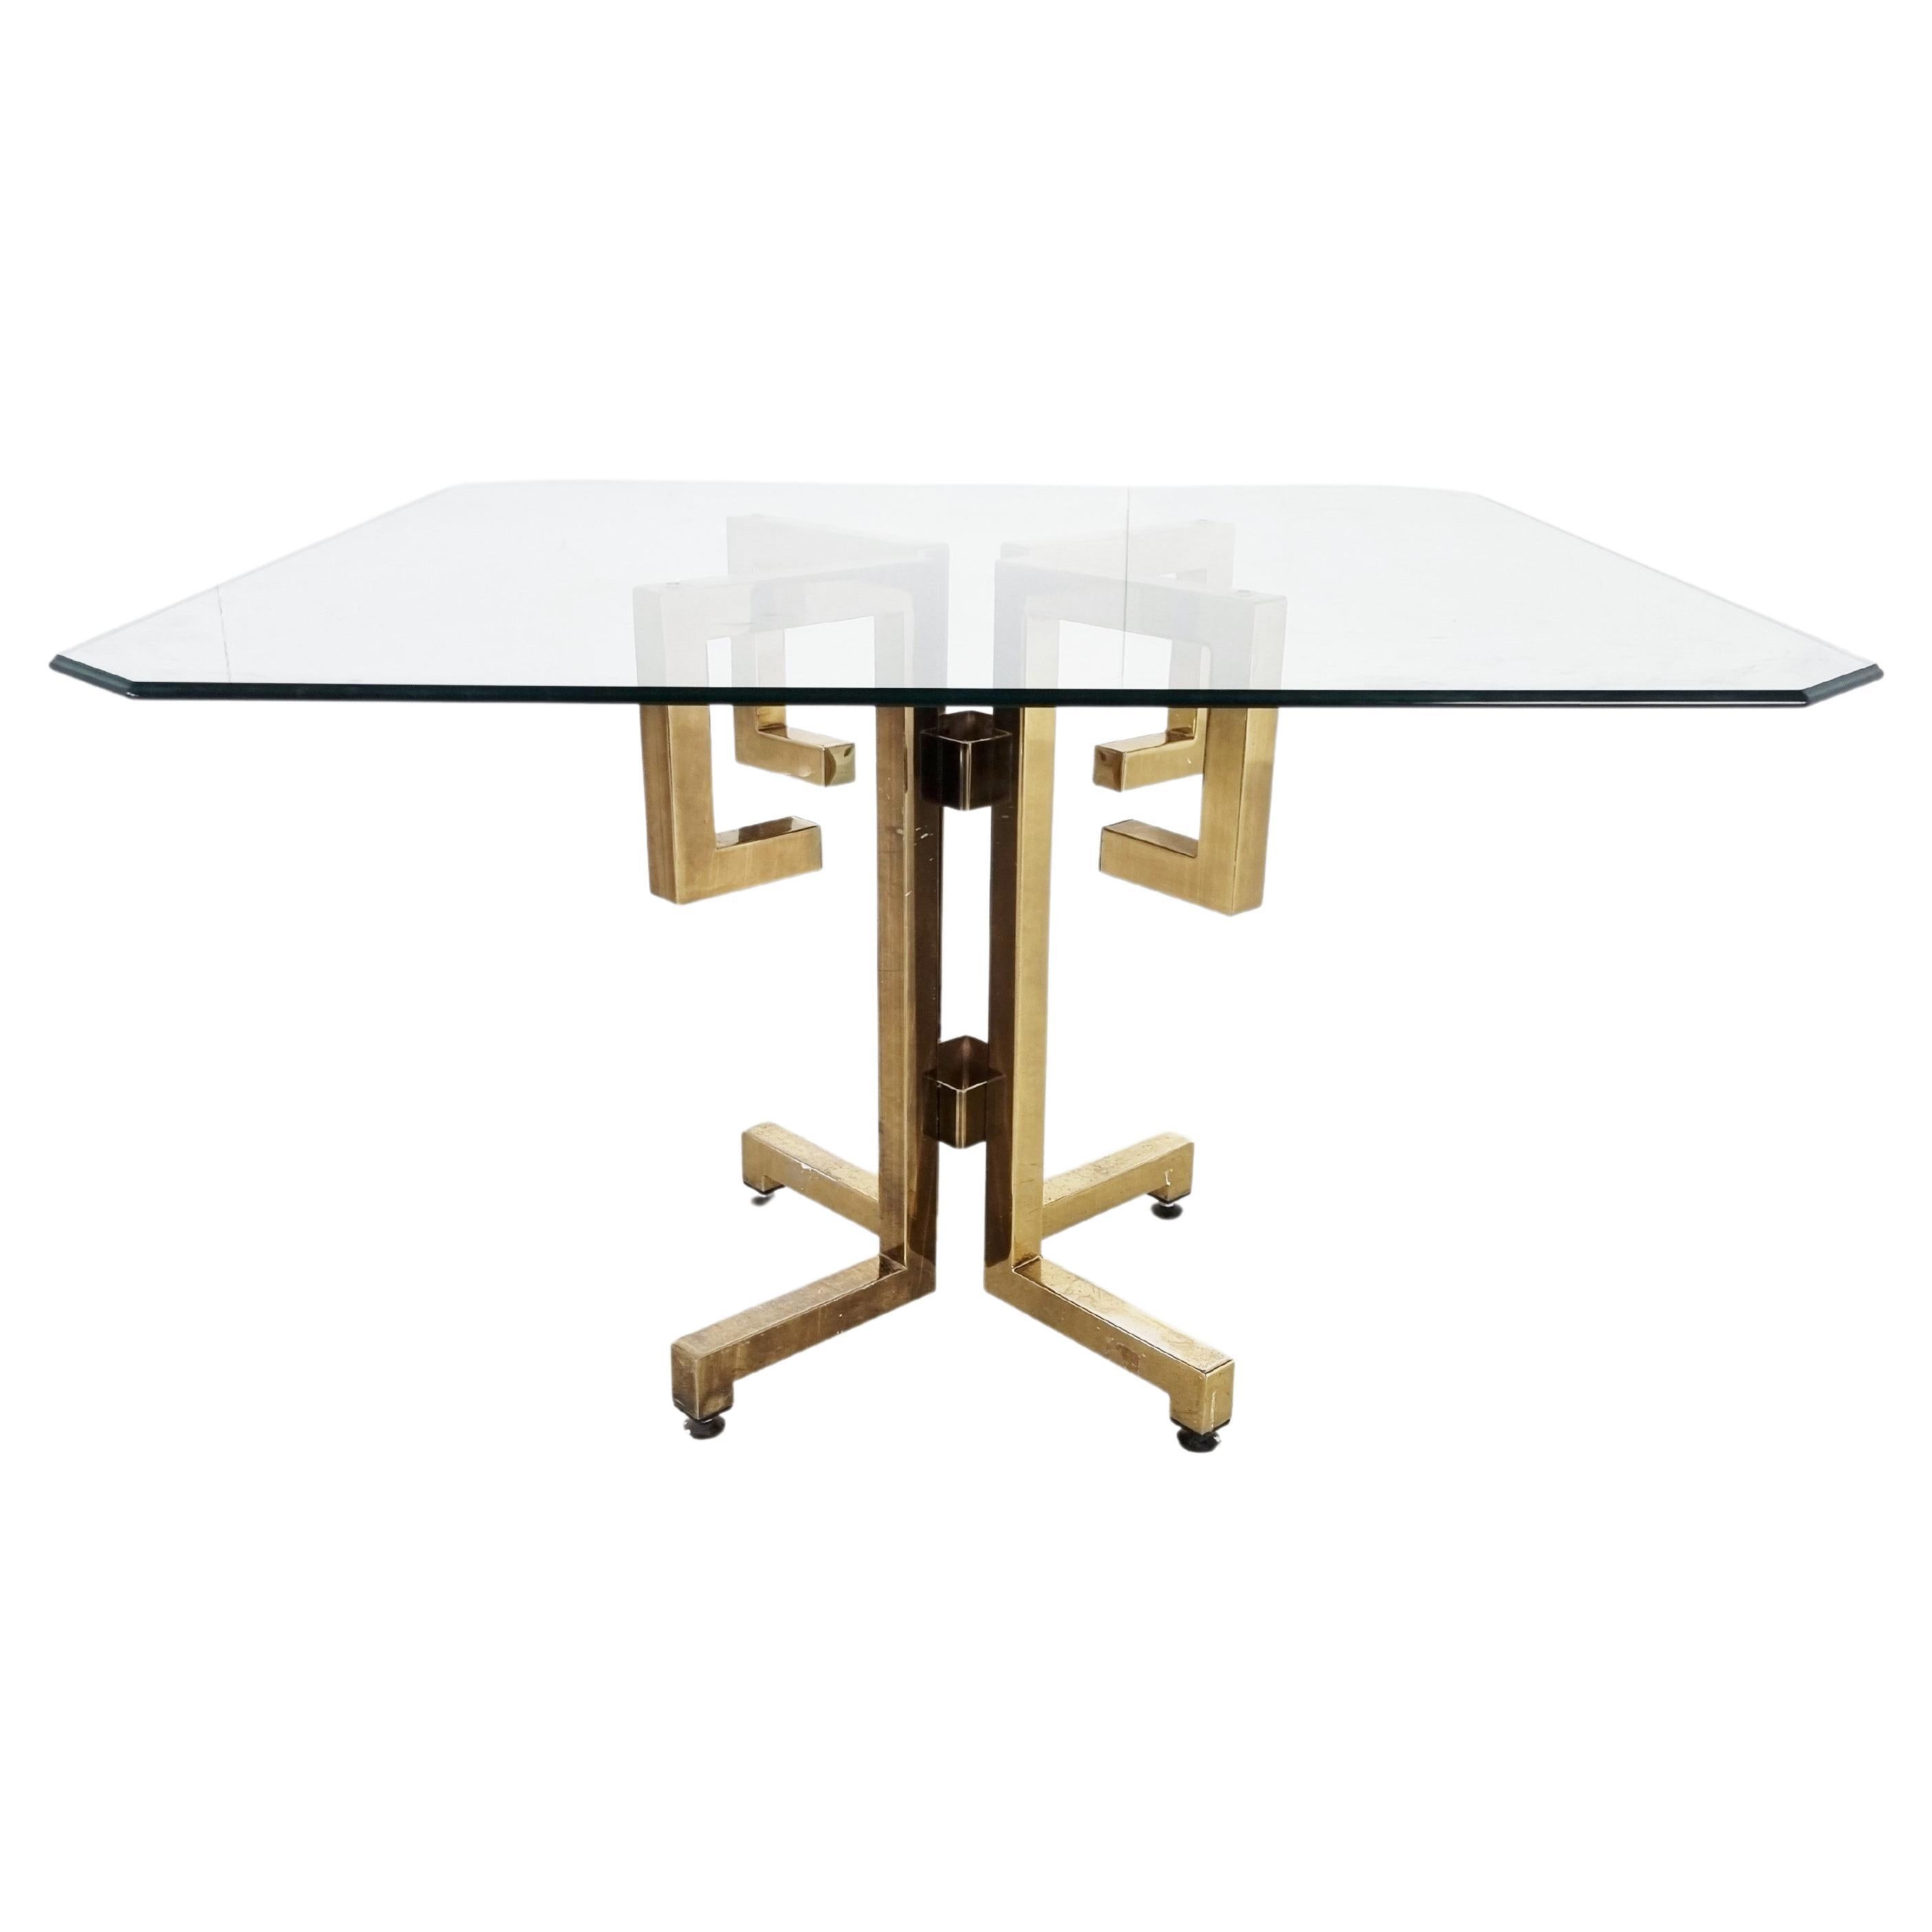 Geometrical Brass Dining Table, 1970s